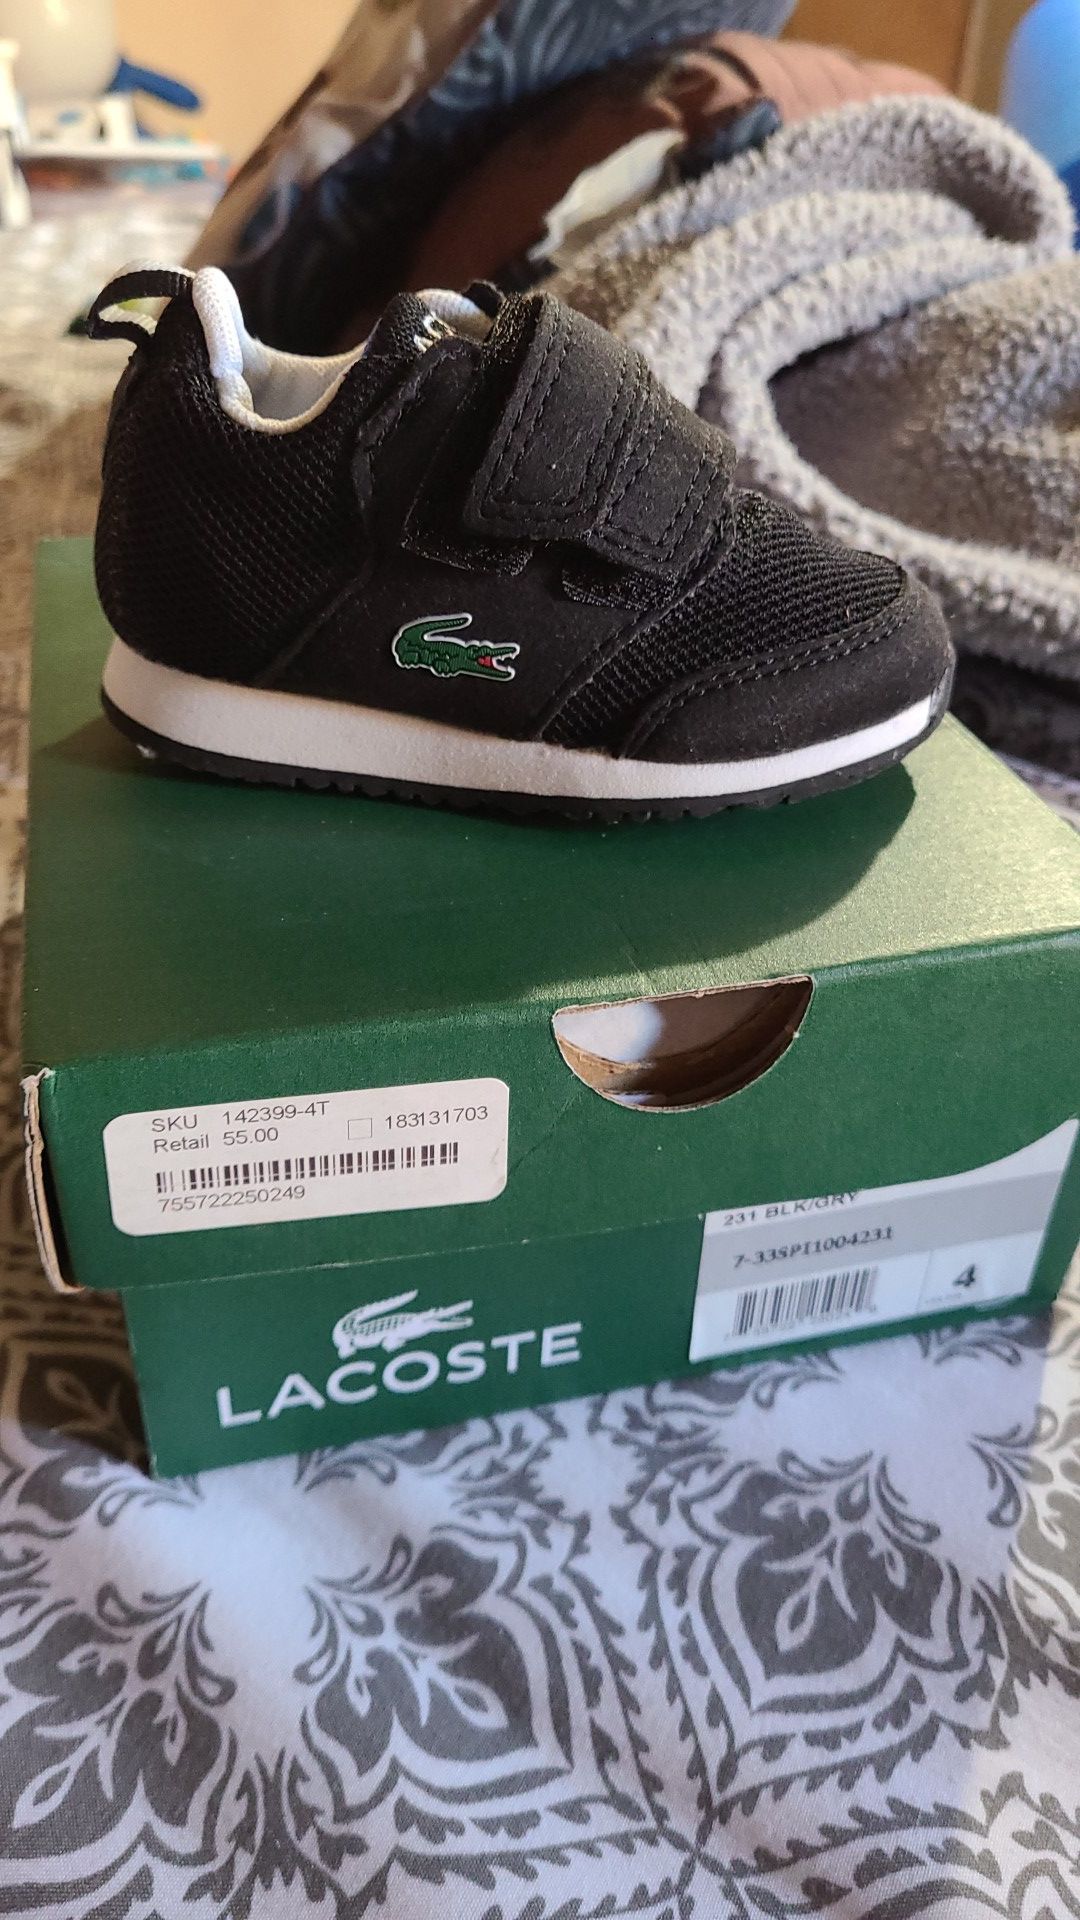 Lacoste shoes for Sale in Pomona, CA